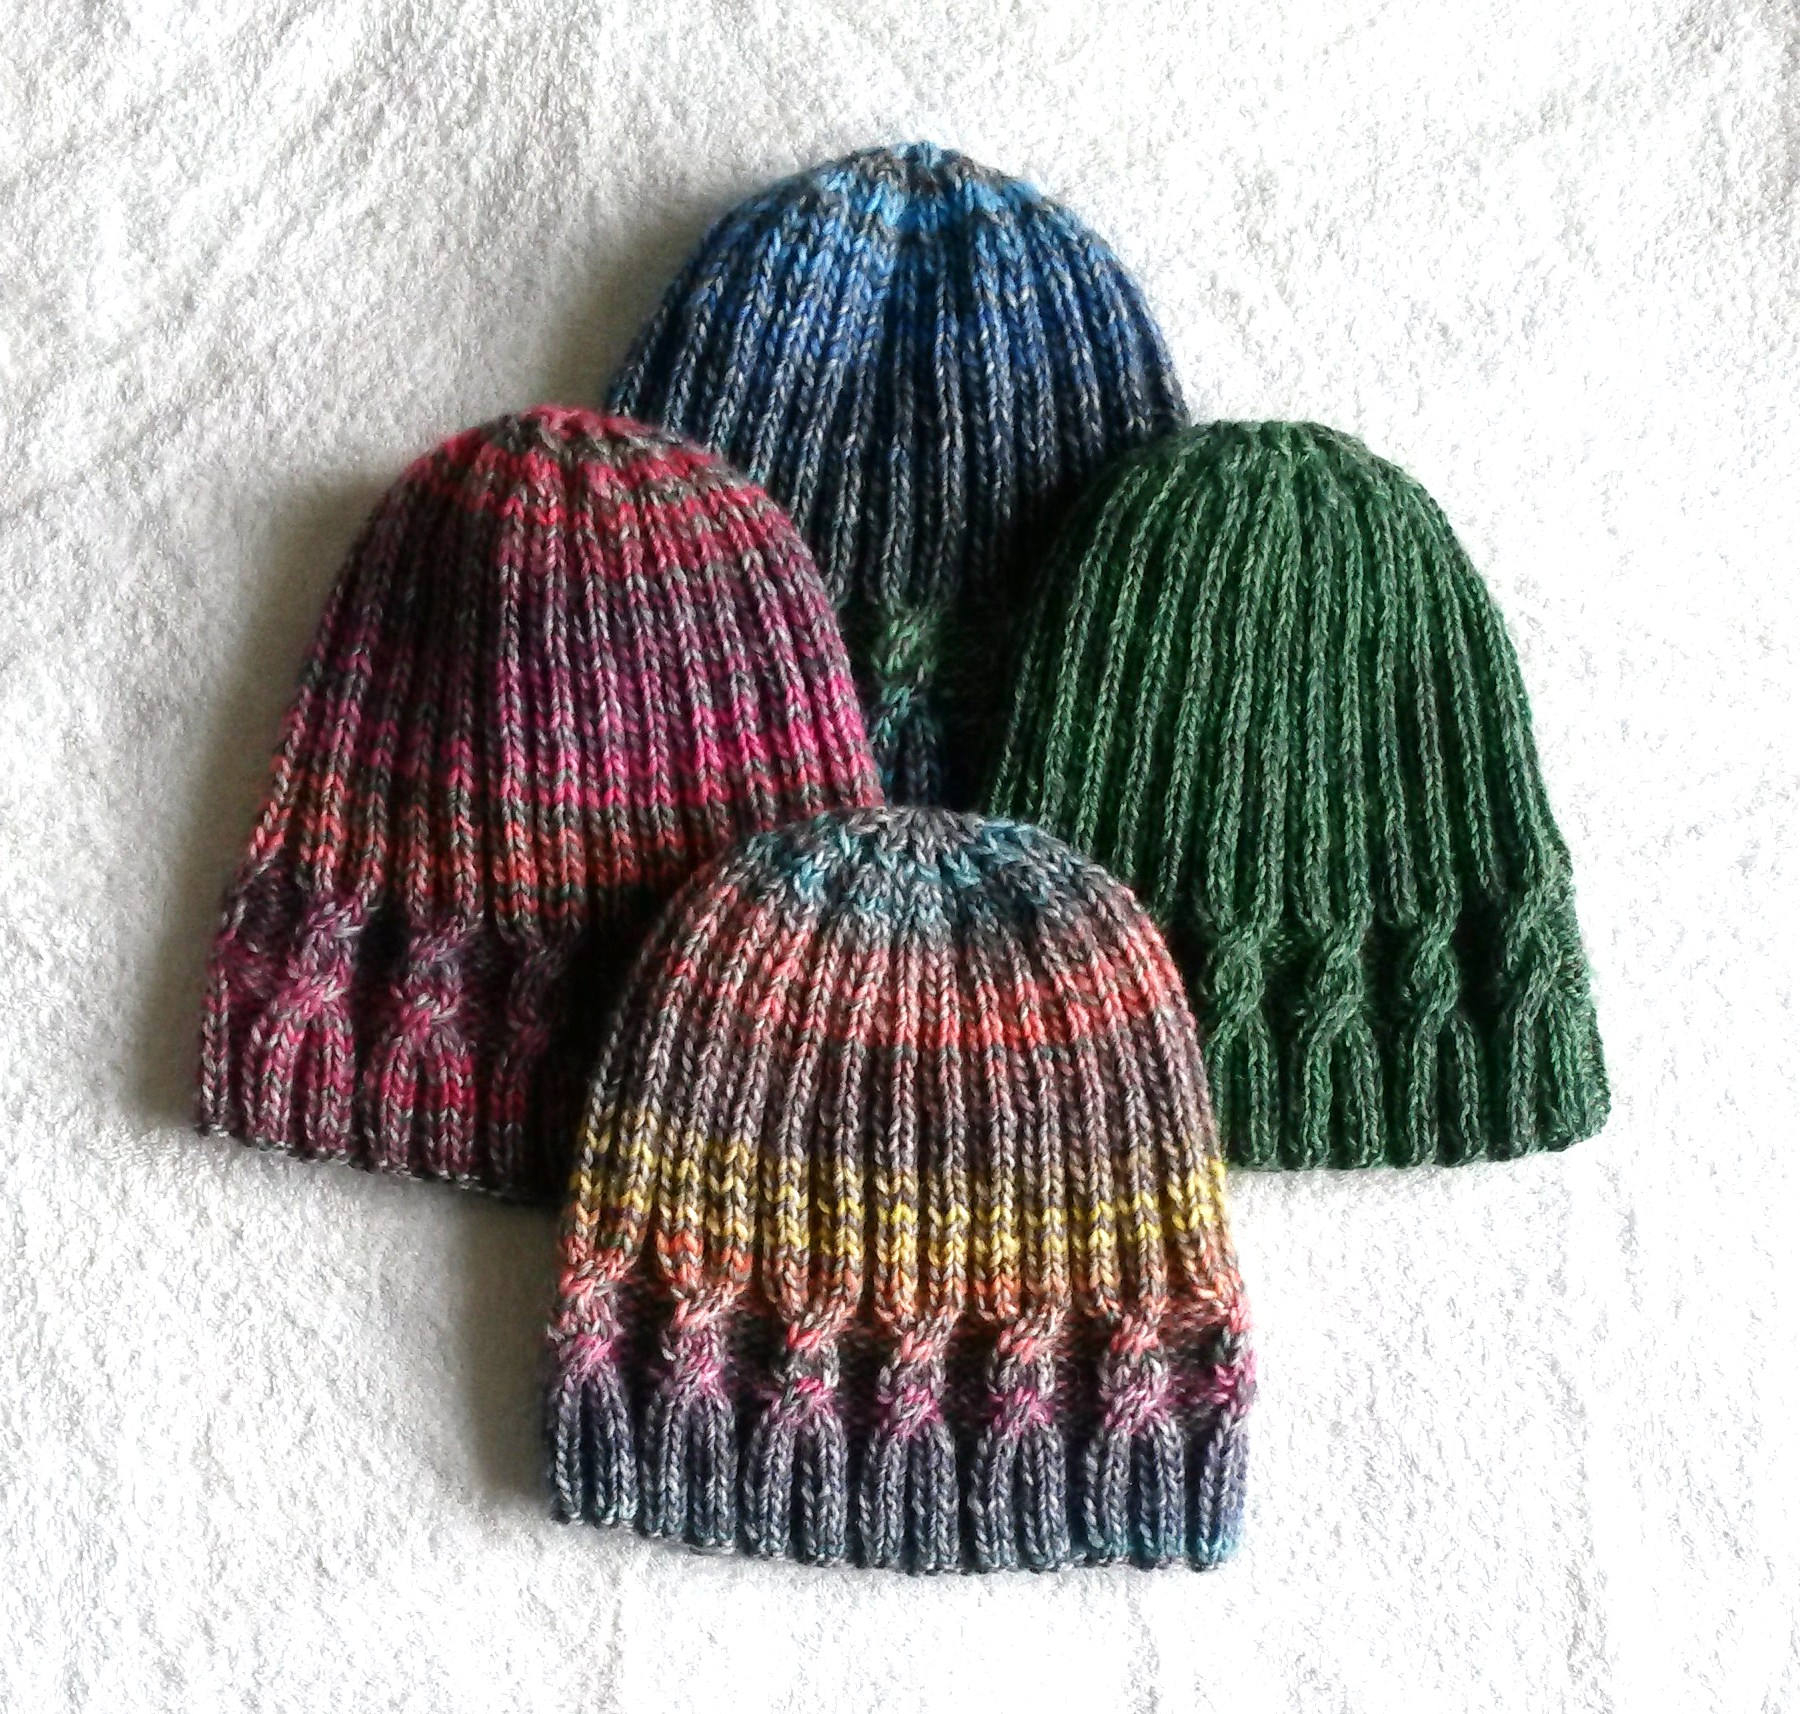 Knitting Patterns Download Knitting Pattern Instant Download Pdf Beanie Hat Pattern Cable Knit